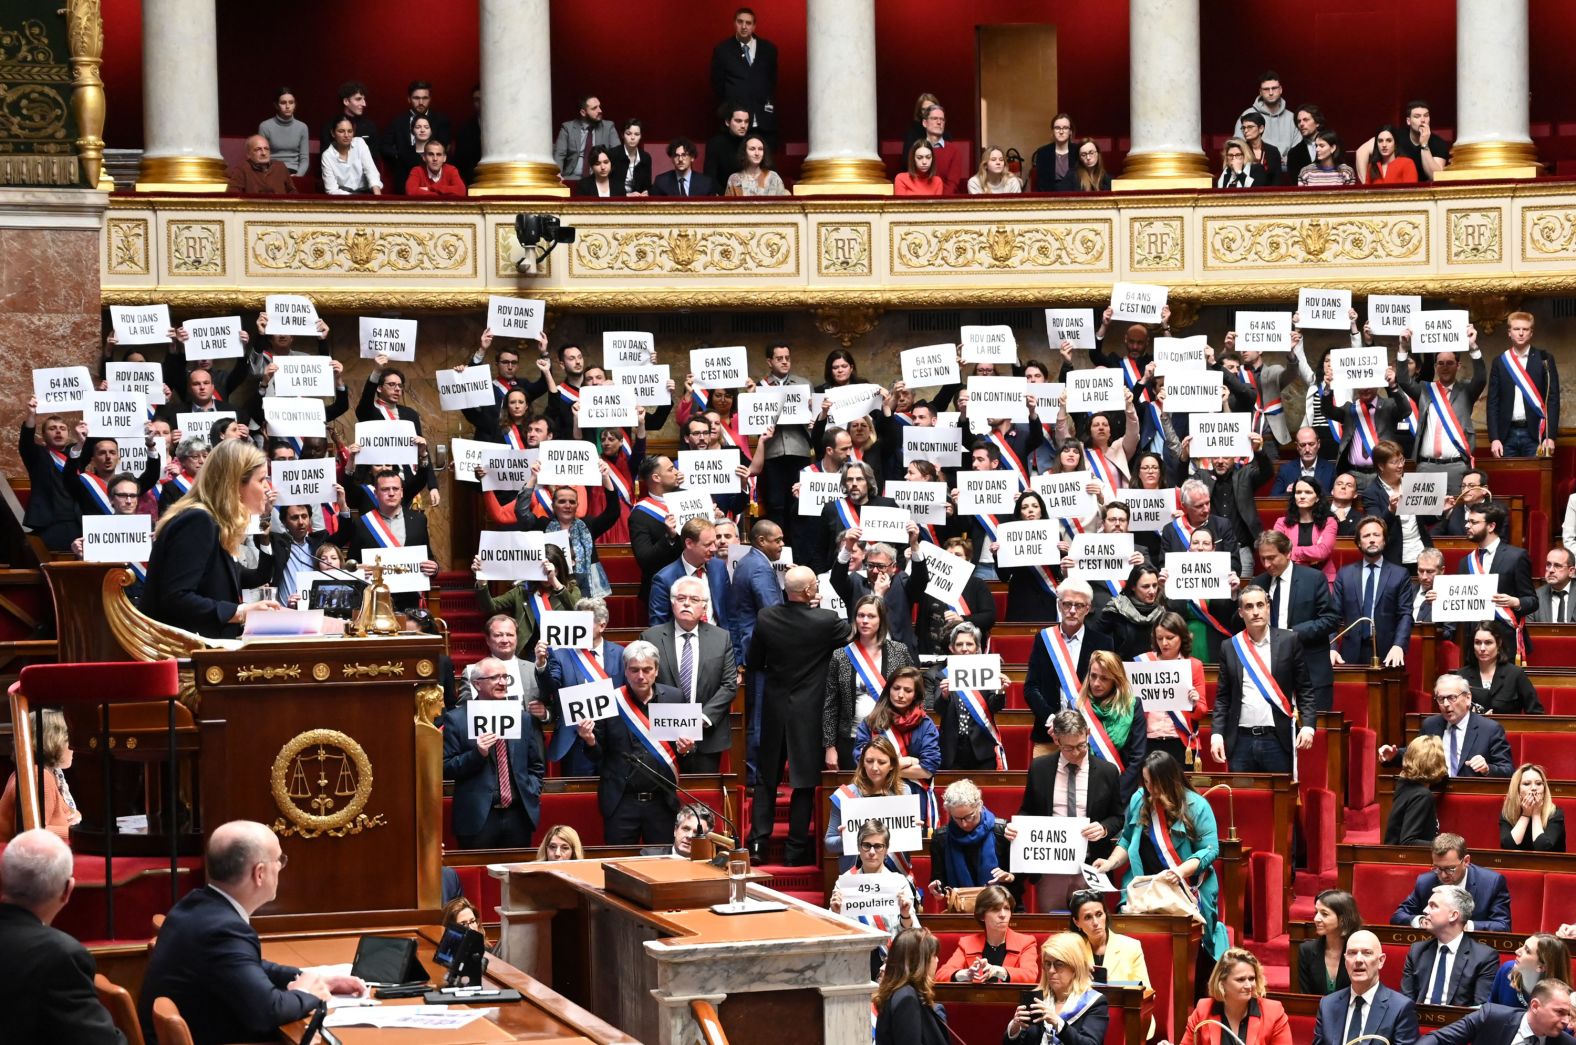 Members of the French National Assembly hold signs after a no-confidence vote against President Emmanuel Macron's government on Monday, March 20. <a href="index.php?page=&url=https%3A%2F%2Fwww.cnn.com%2F2023%2F03%2F20%2Fworld%2Fmacron-france-pension-no-confidence-intl%2Findex.html" target="_blank">Two no-confidence votes failed</a>, clearing the way for Macron's pension reforms to be implemented.